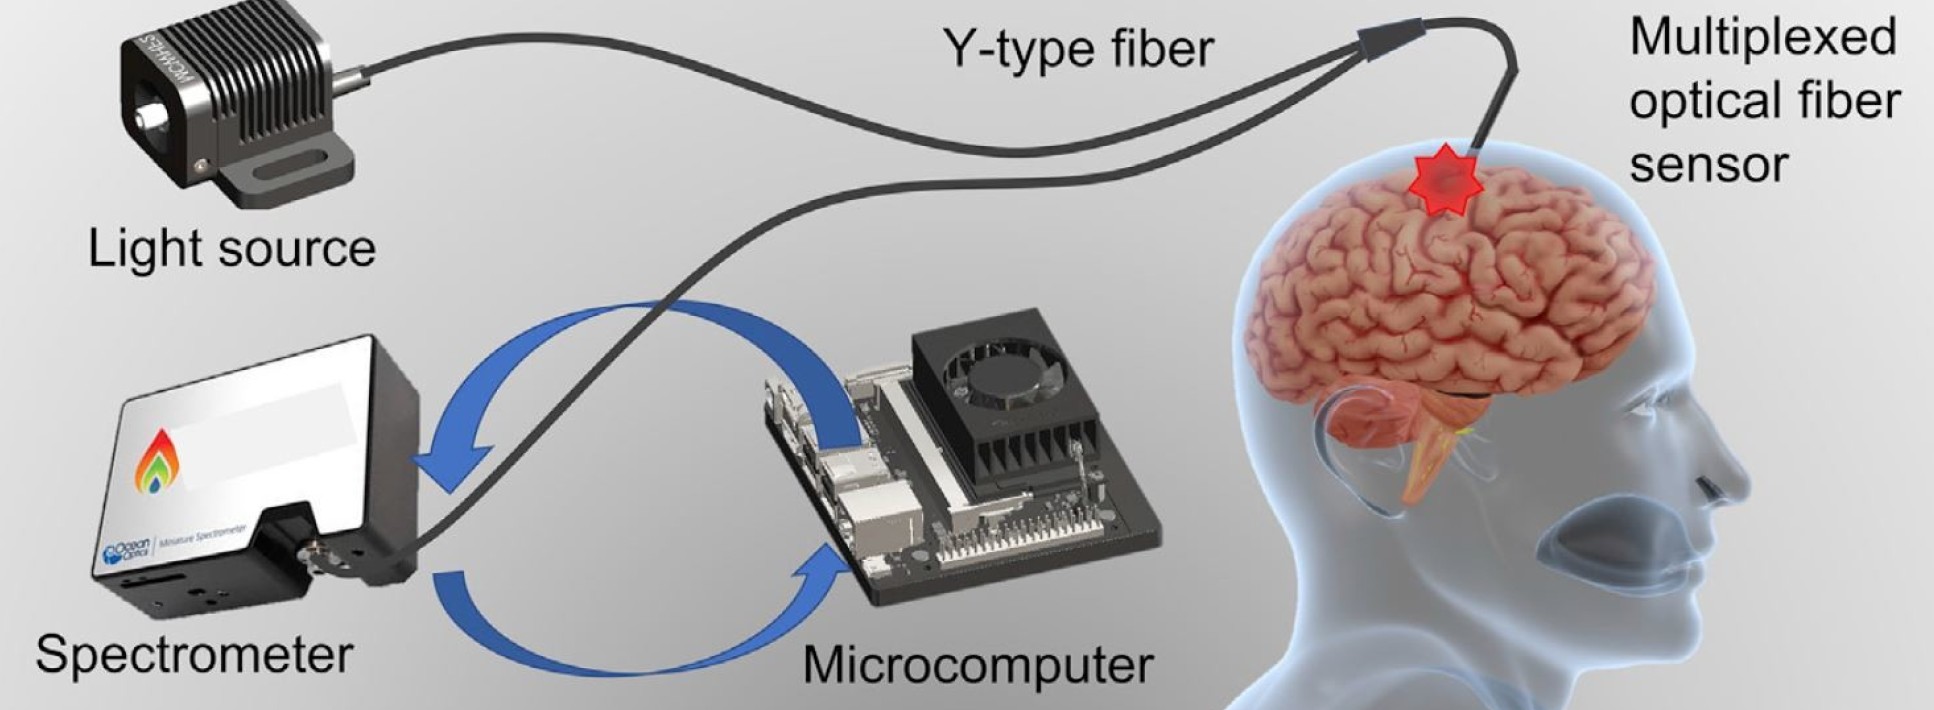 Illustration of the device in the brain linked to a light source, a spectrometer and a microcomputer via Y-type fiber cables